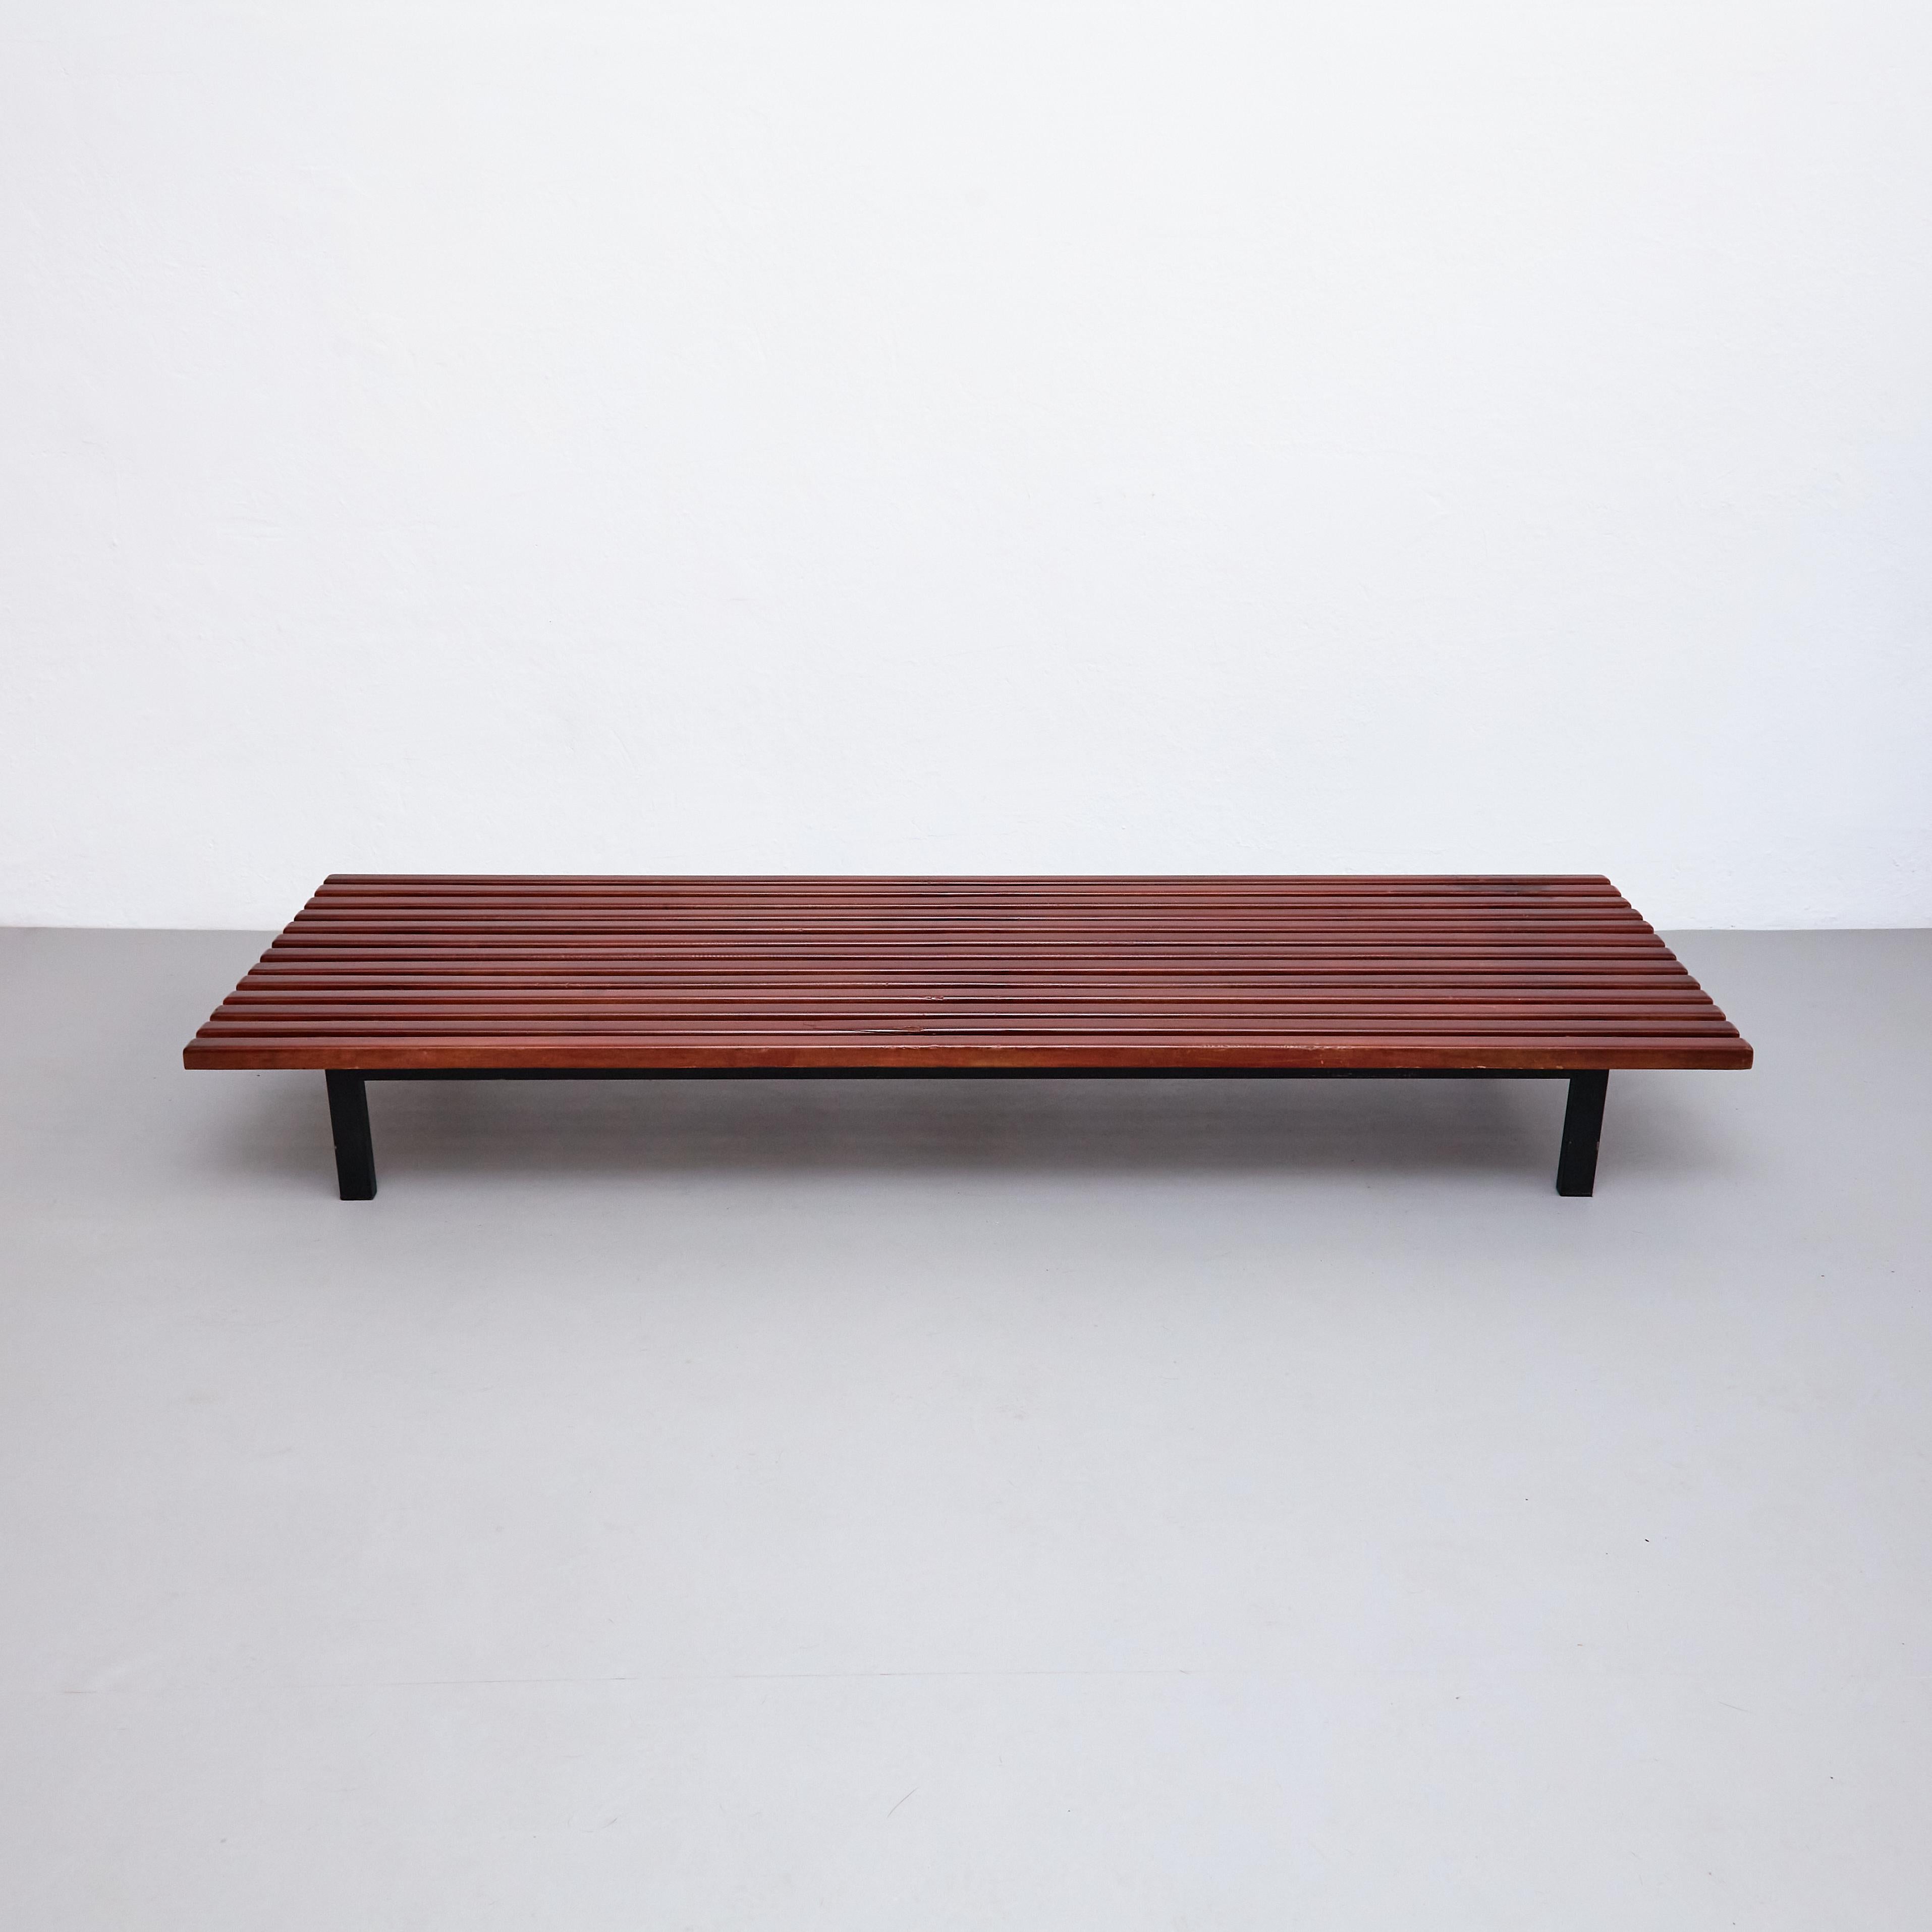 Bench designed by Charlotte Perriand, circa 1950.
Edited by Steph Simon (France)

Wood, metal frame legs has been redone according the original.

Provenance: Cansado, Mauritania (Africa).

Materials: 
Wood, metal

Dimensions: 
D 70 x W